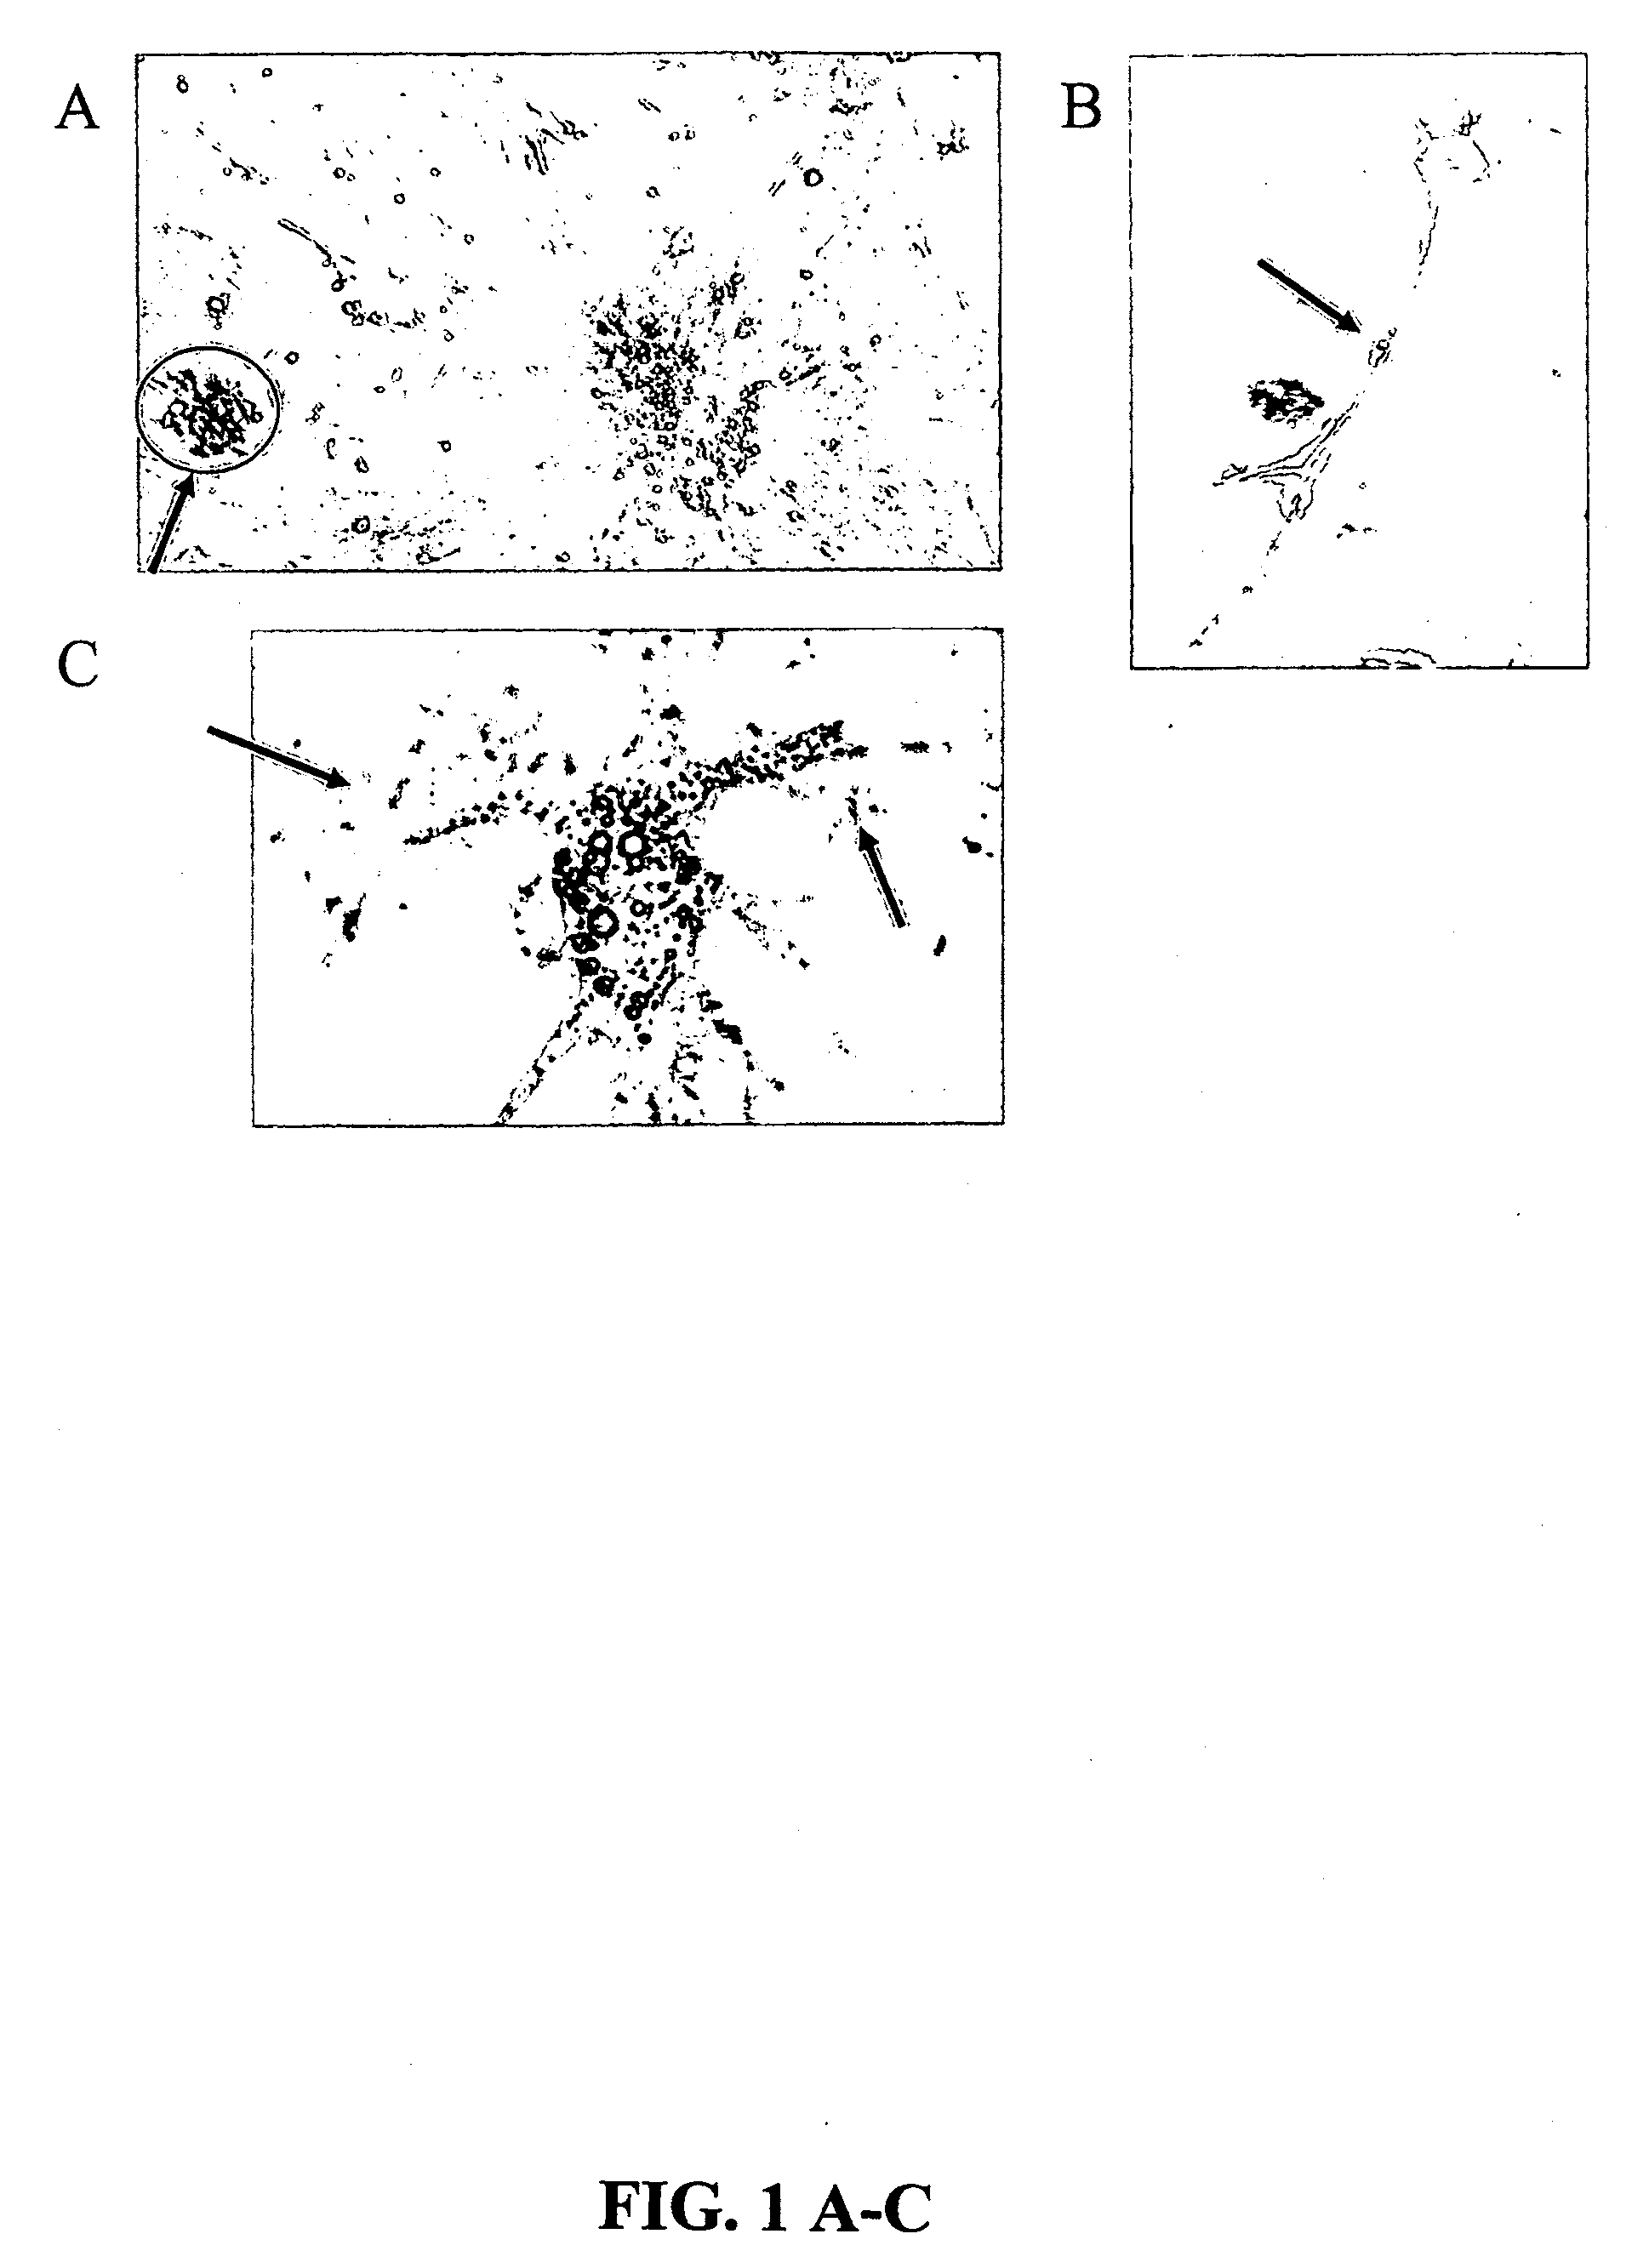 Cultures, products and methods using umbilical cord matrix cells